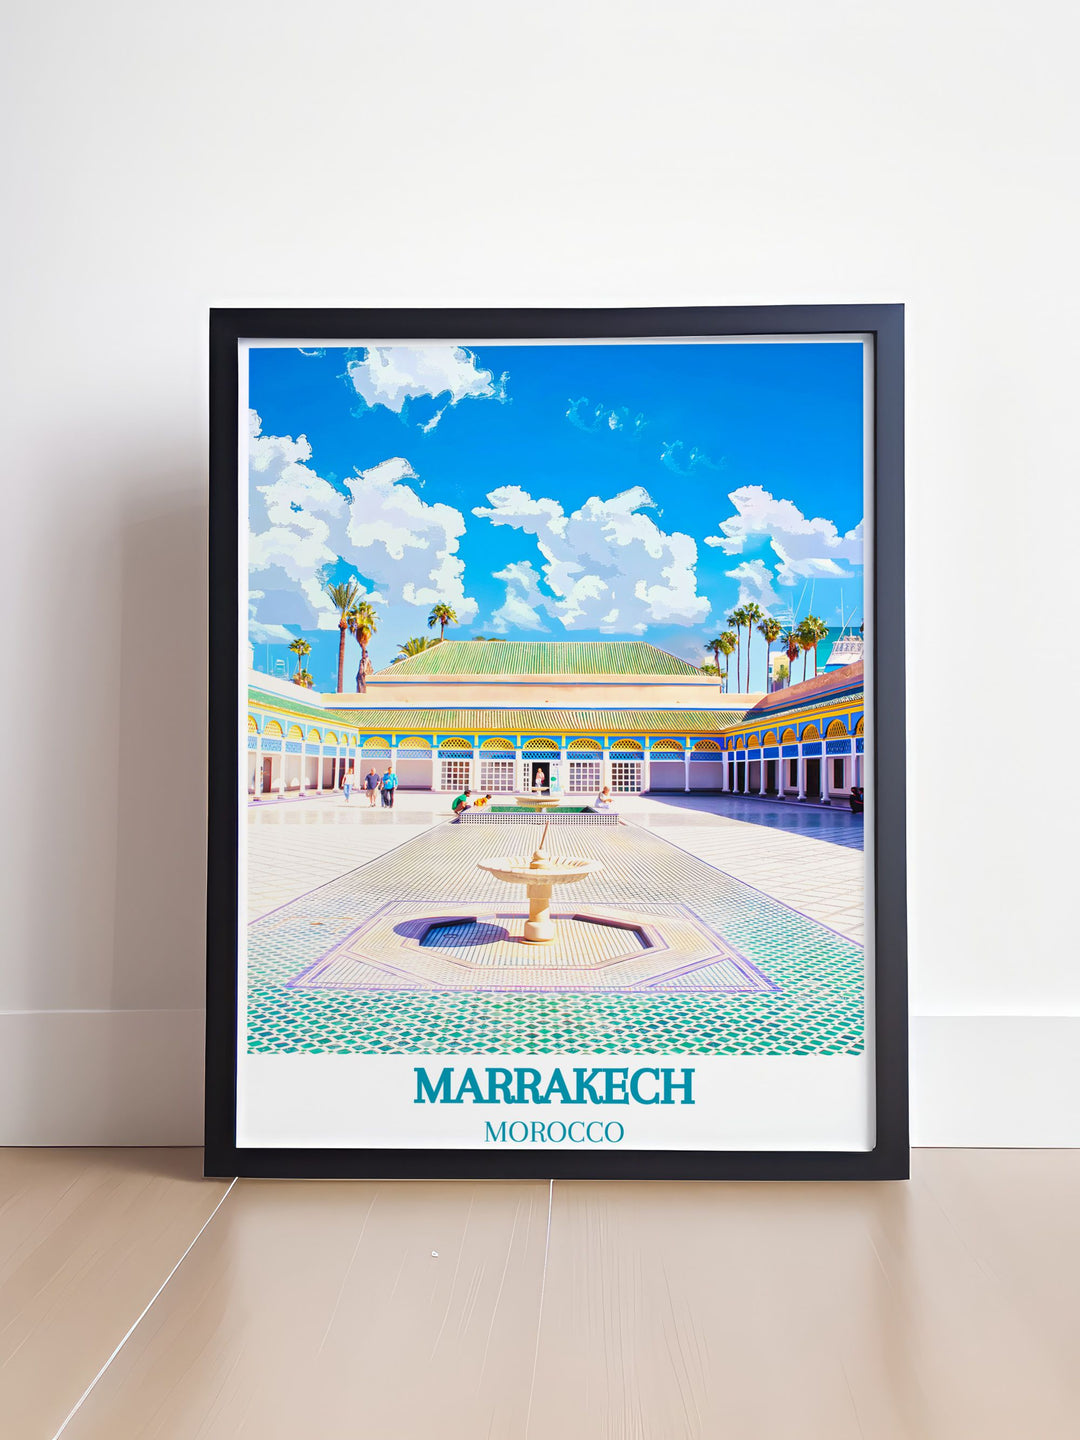 This detailed poster of Marrakech illustrates the citys bustling souks and historic sites, making it an excellent addition to any art collection celebrating Moroccan culture.